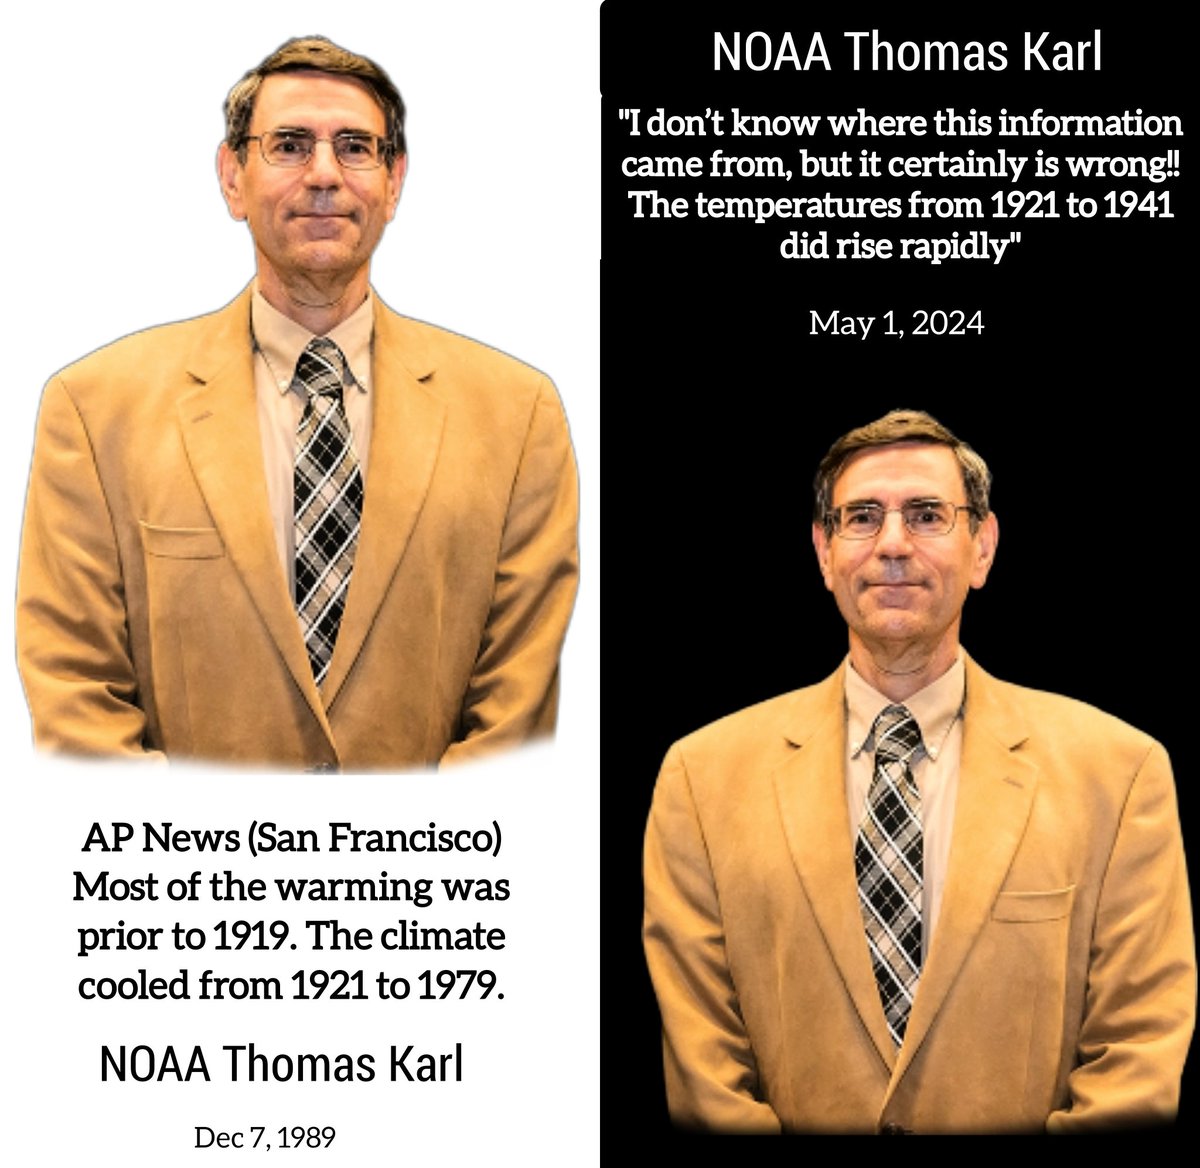 Thomas Karl vs Thomas Karl One is telling the truth. The other one is lying. 🤔 h/t @NOAAClimate